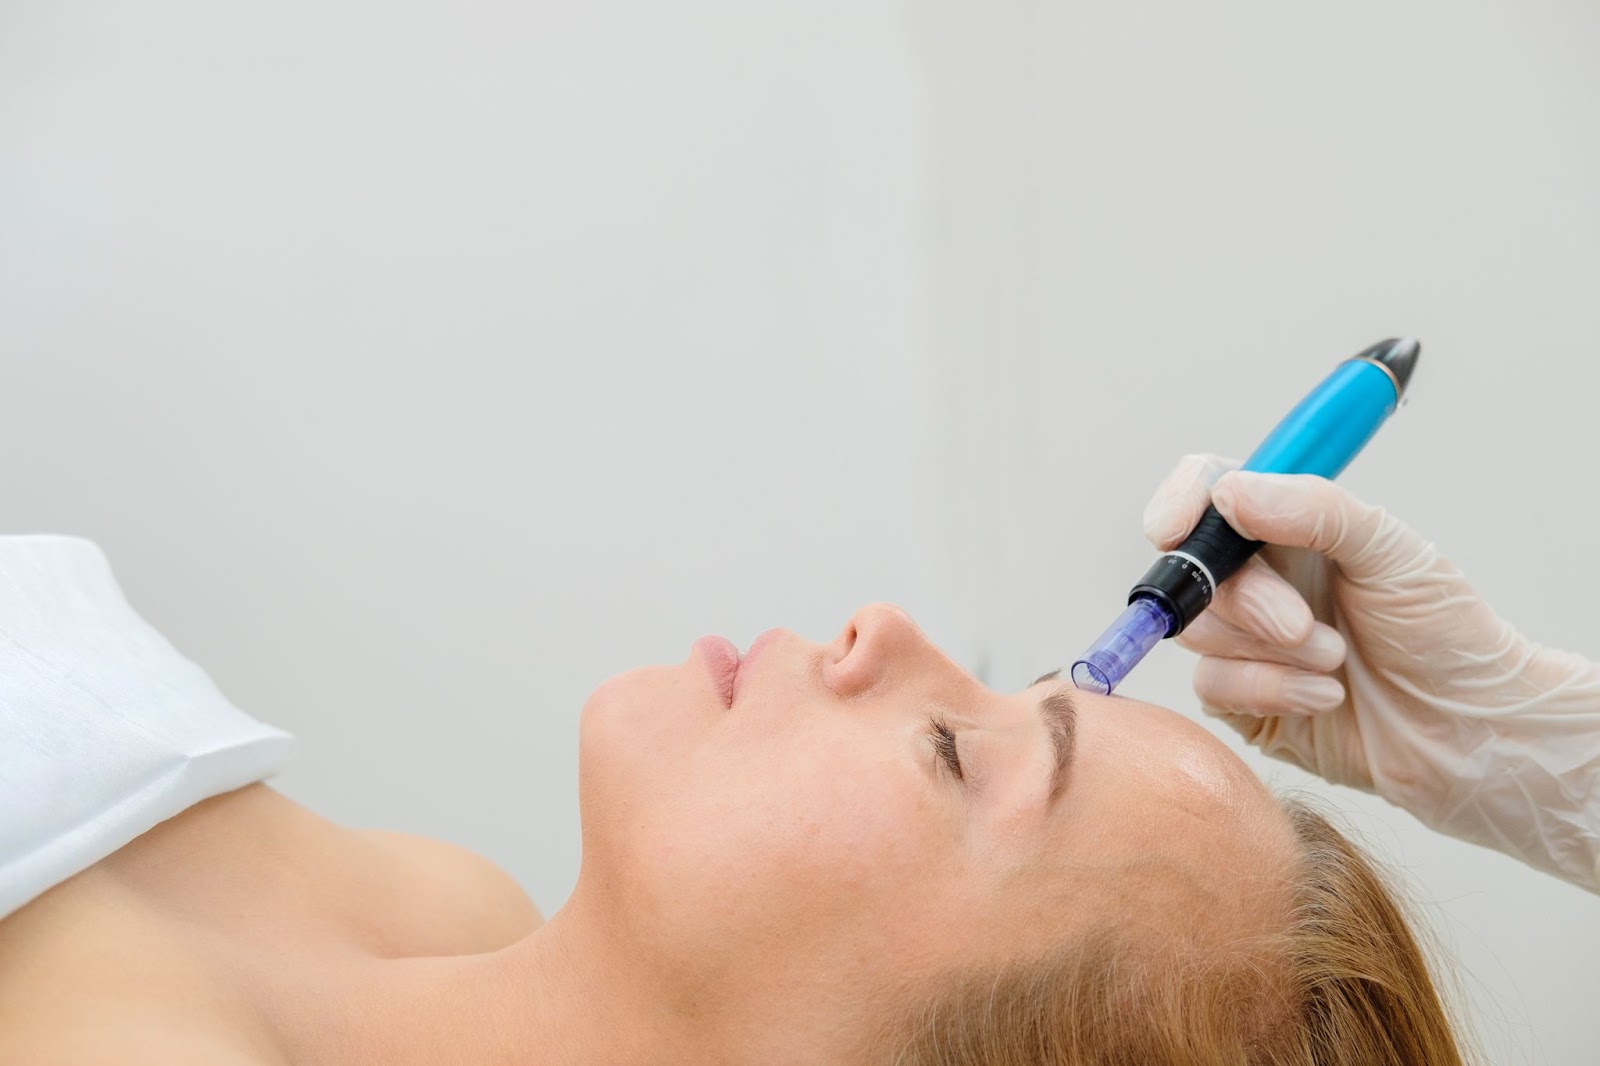 Microneedling for Hyperpigmentation and Dark Spots